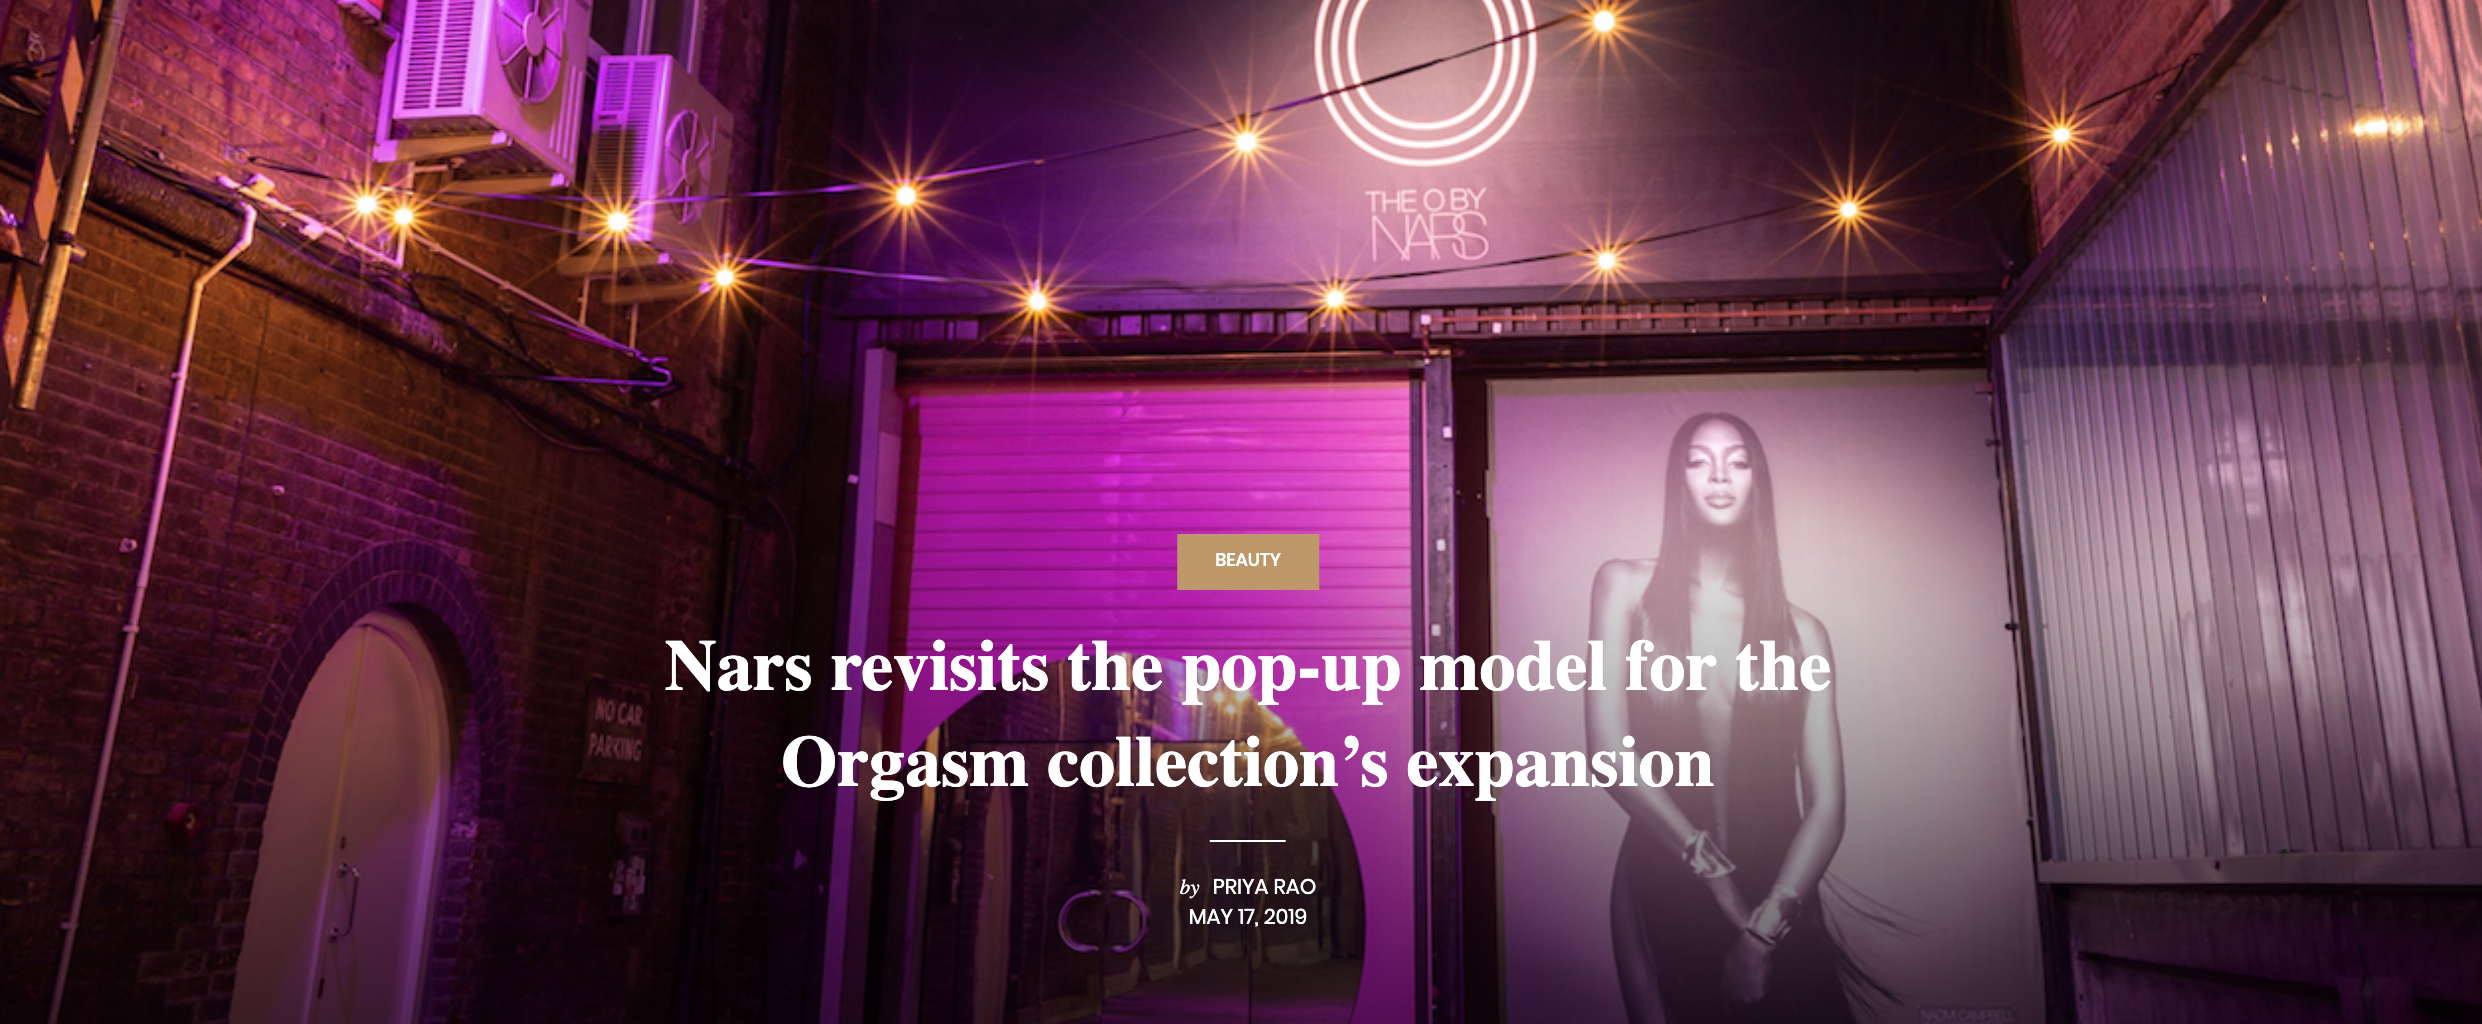 In the news: Nars revisits the pop-up model for the Orgasm collection’s expansion